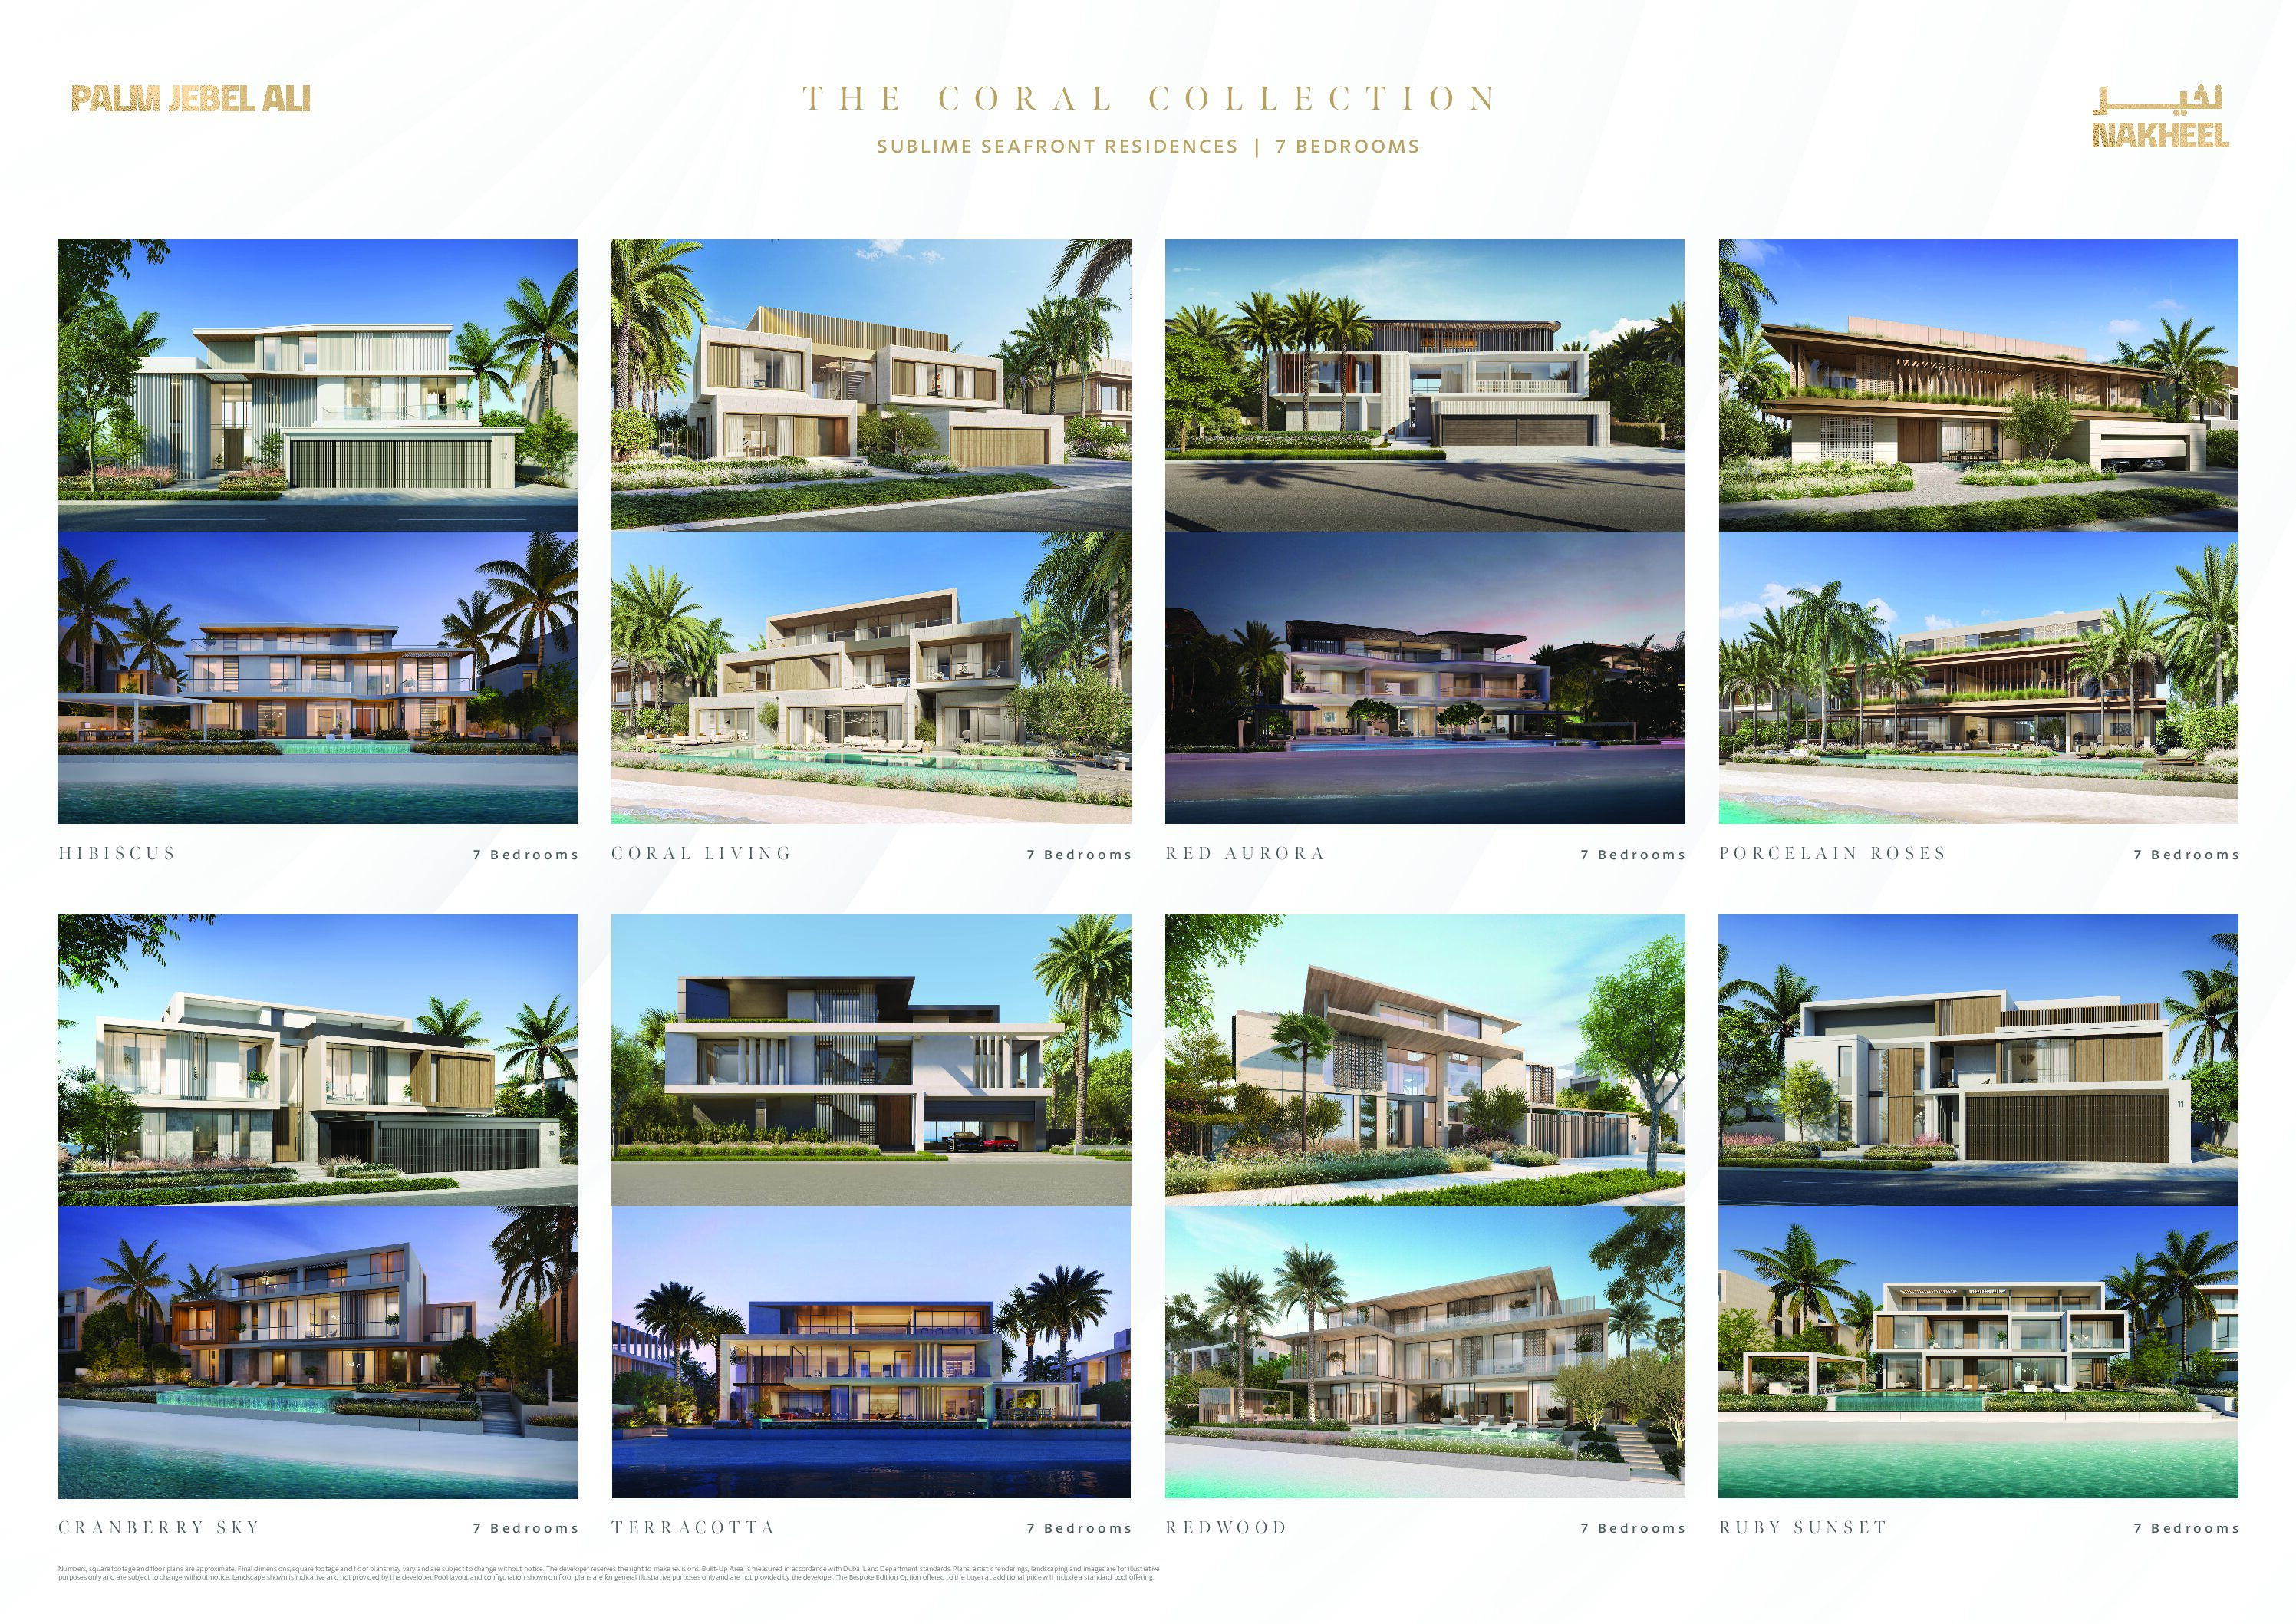 The Coral Collection Villas Render and Floorplans